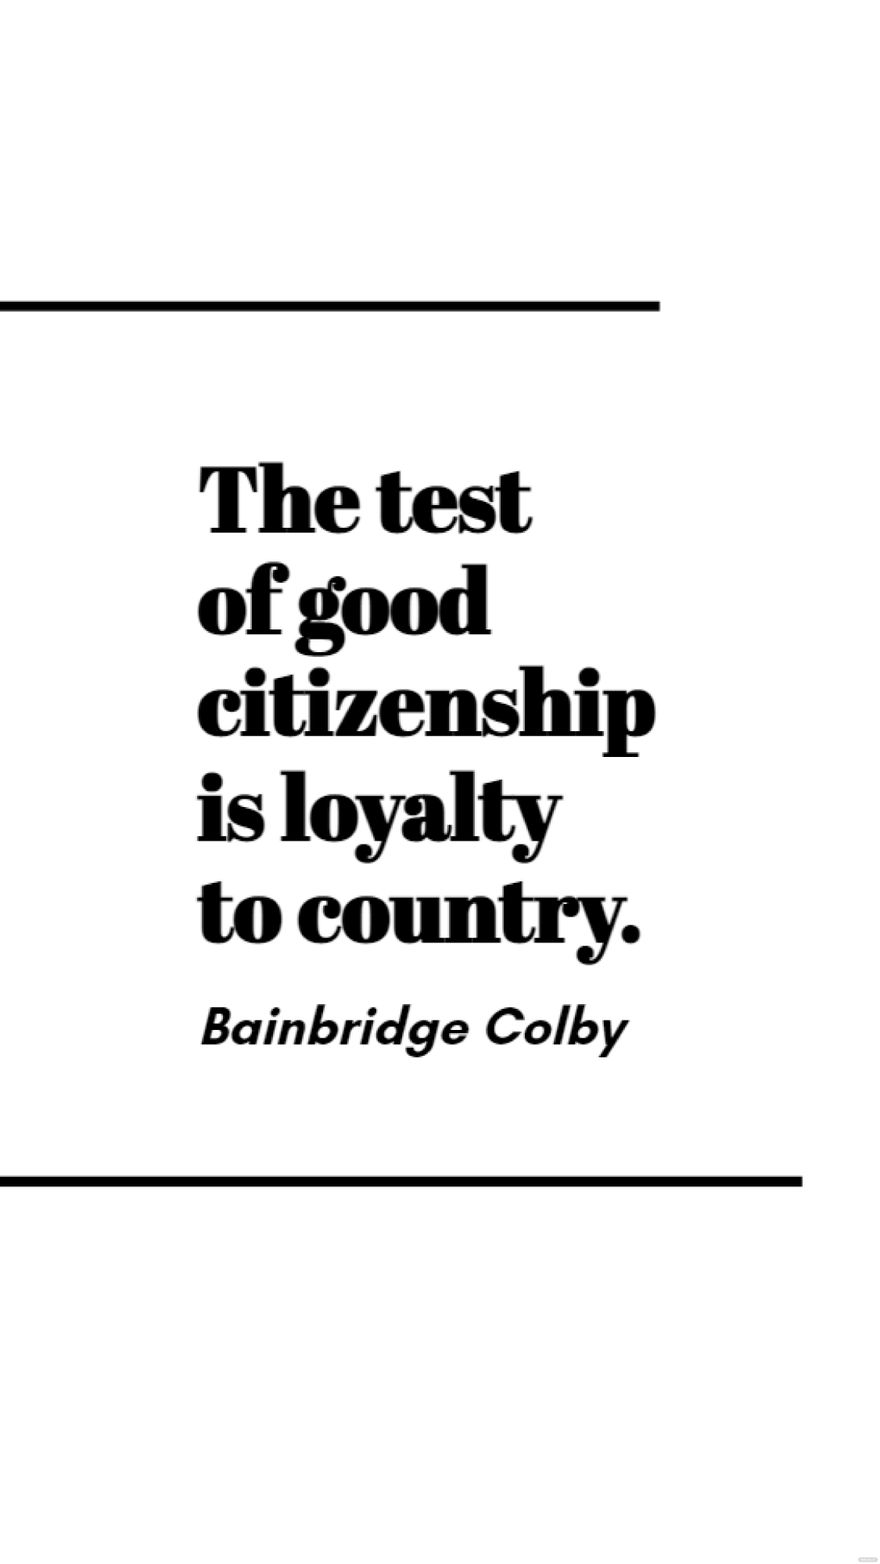 Free Bainbridge Colby - The test of good citizenship is loyalty to country. in JPG